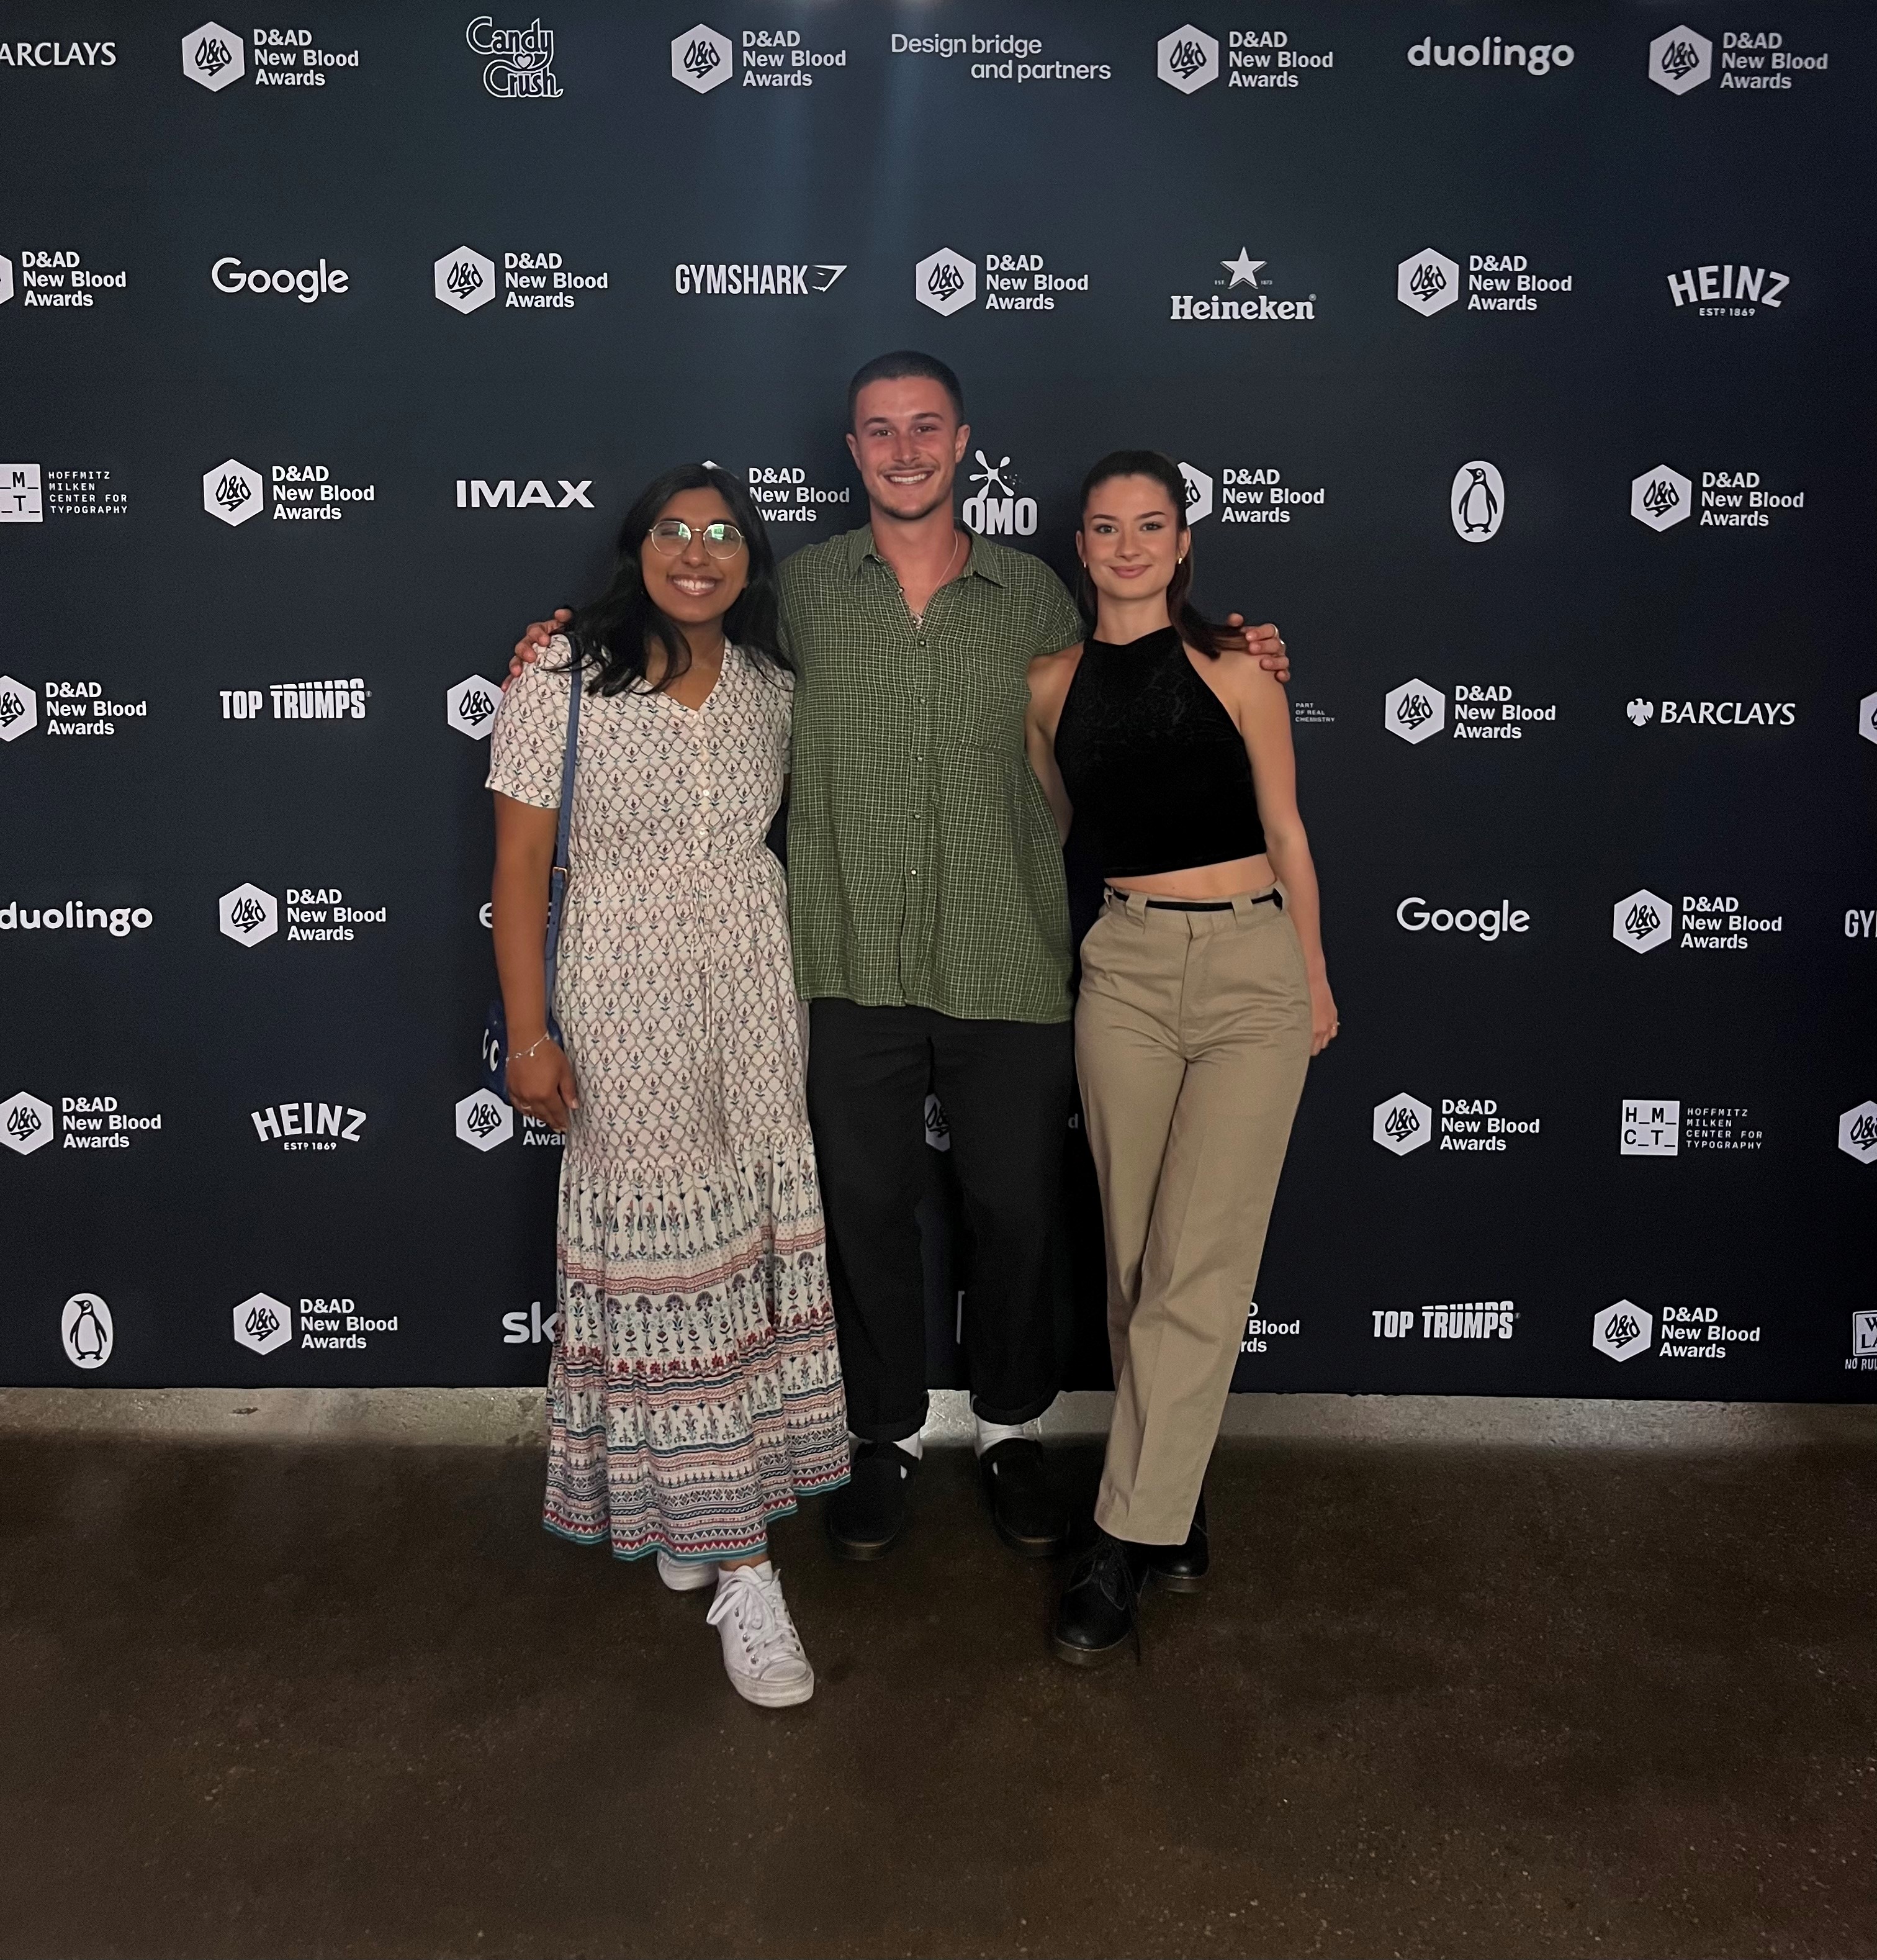 Graduates Nitya Thawani, David Hitchcock and Joanna Nicholl standing in front of a sponsored backdrop at the D&AD Awards evening.